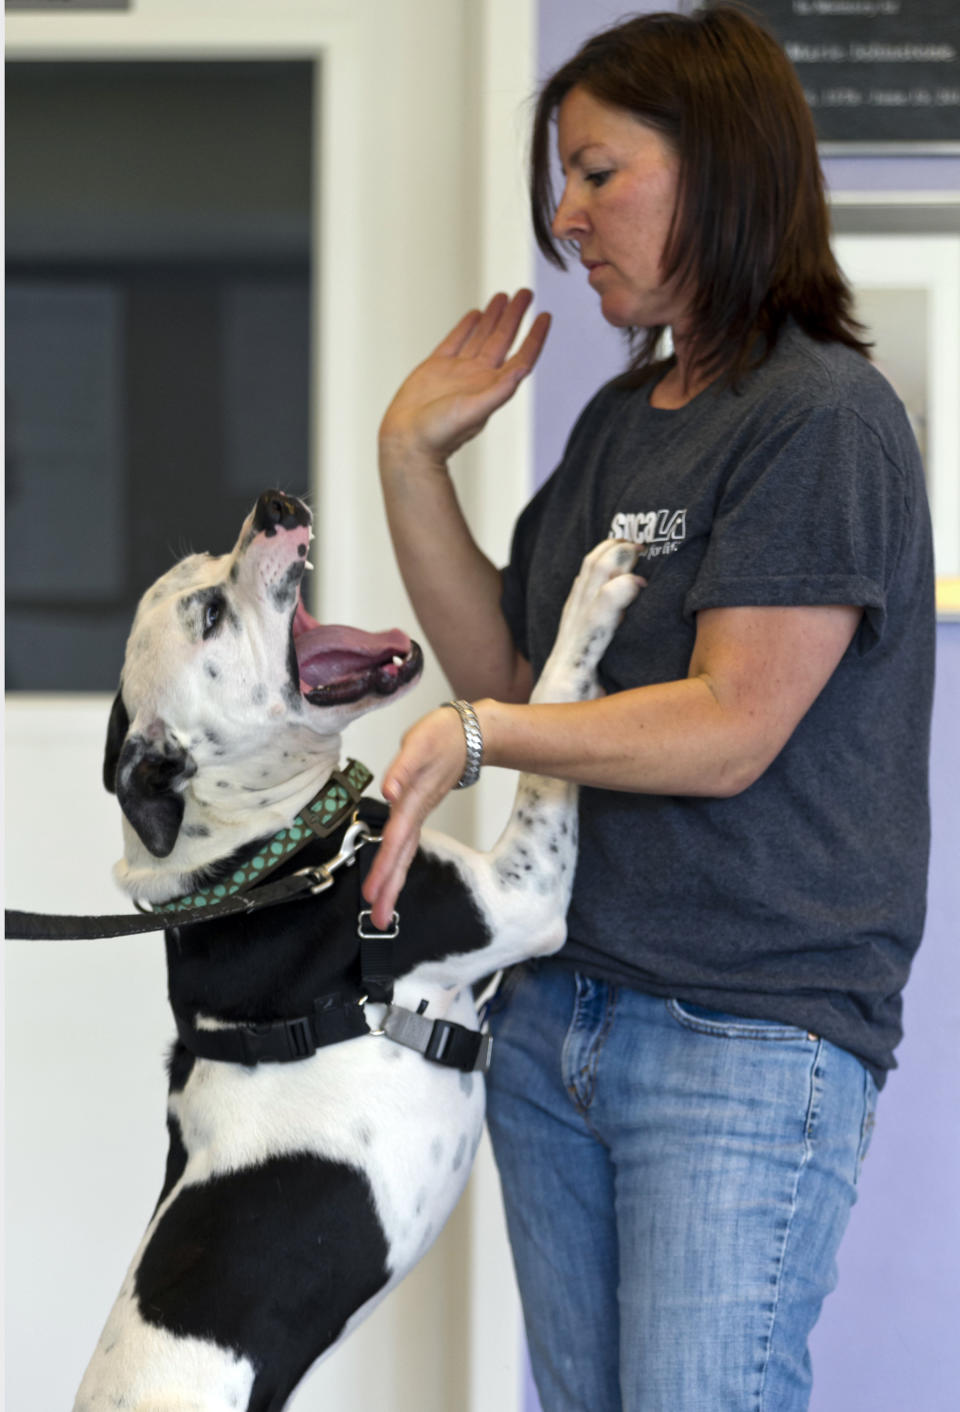 Eleasha Gall, director of behavior and training at spcaLA (Society for the Prevention of Cruelty to Animals Los Angeles), interacts with Tux, a one-year-old Pit bull, in an effort to promote behavior to avoid dog bites, at the spcaLA P.D. Pitchford Companion Animal Village and Education Center in Long Beach, Calif., on Wednesday, May 16, 2012. One of the nation's largest home insurers released its 2011 statistics on dog bite claims Wednesday. A State Farm Insurance spokesman says more than $109 million was paid on about 3,800 dog bite claims nationwide. (AP Photo/Damian Dovarganes)